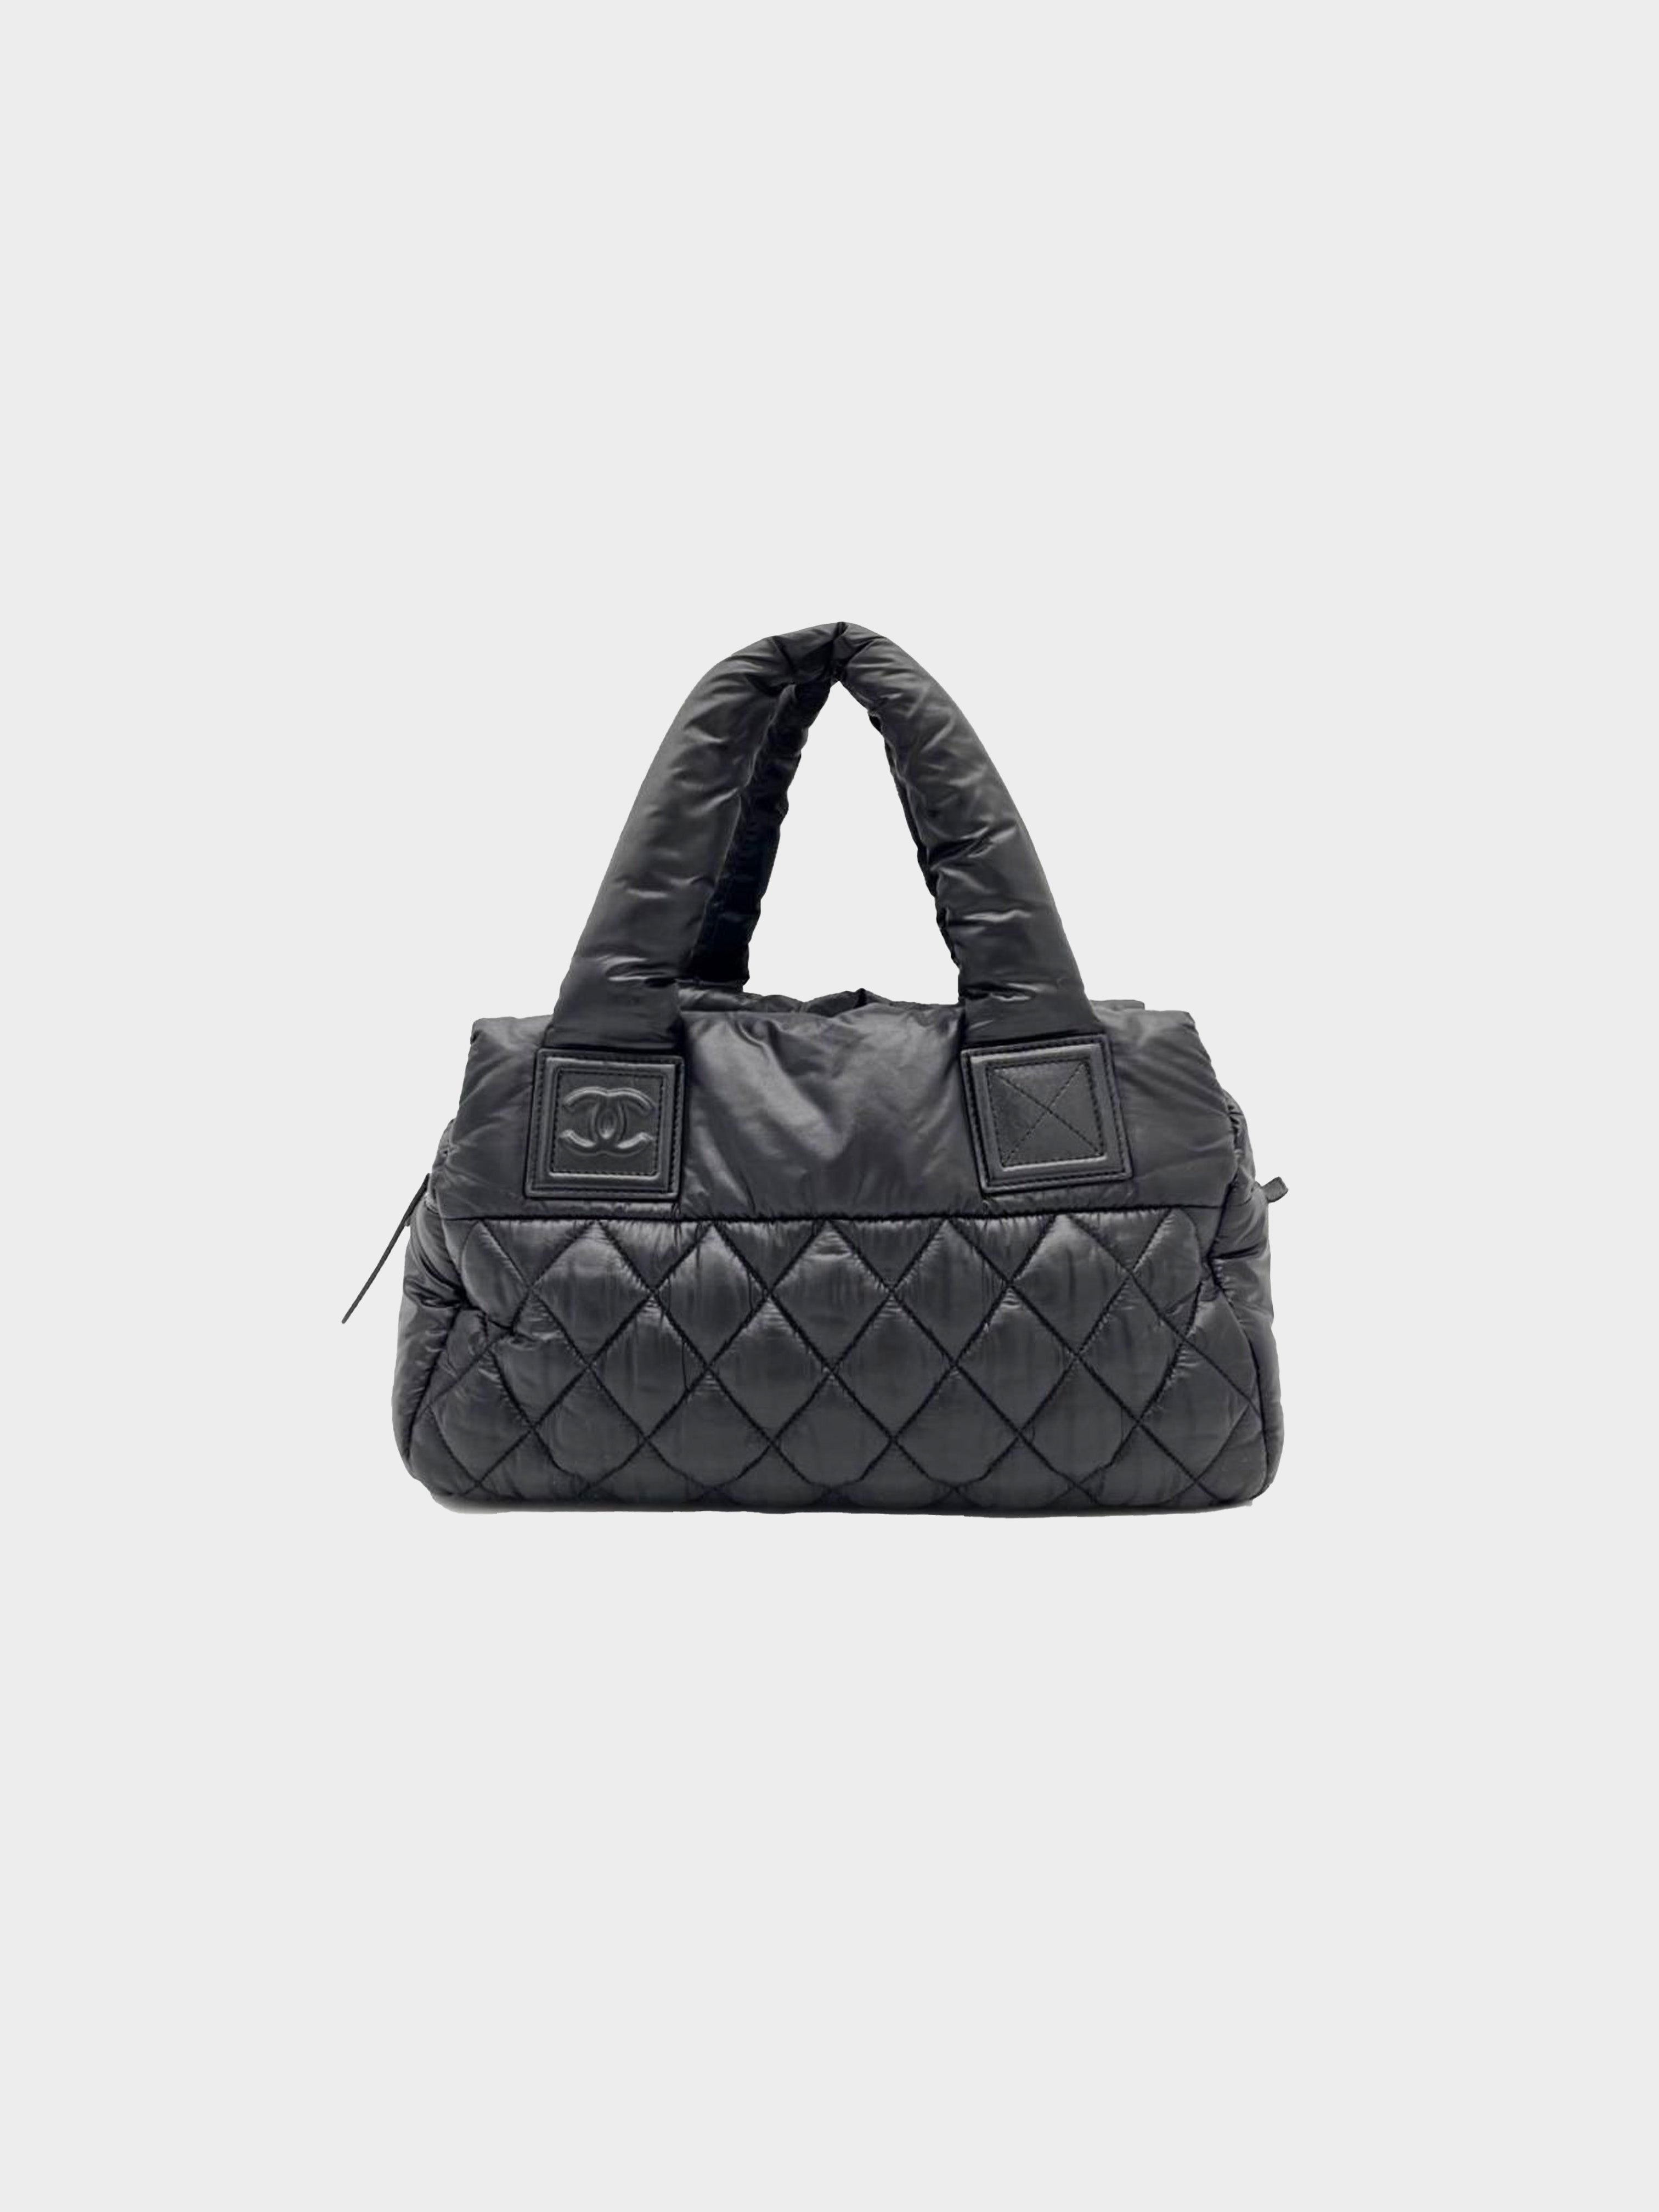 Chanel Quilted Puffy Leather Shoulder Bag Tote